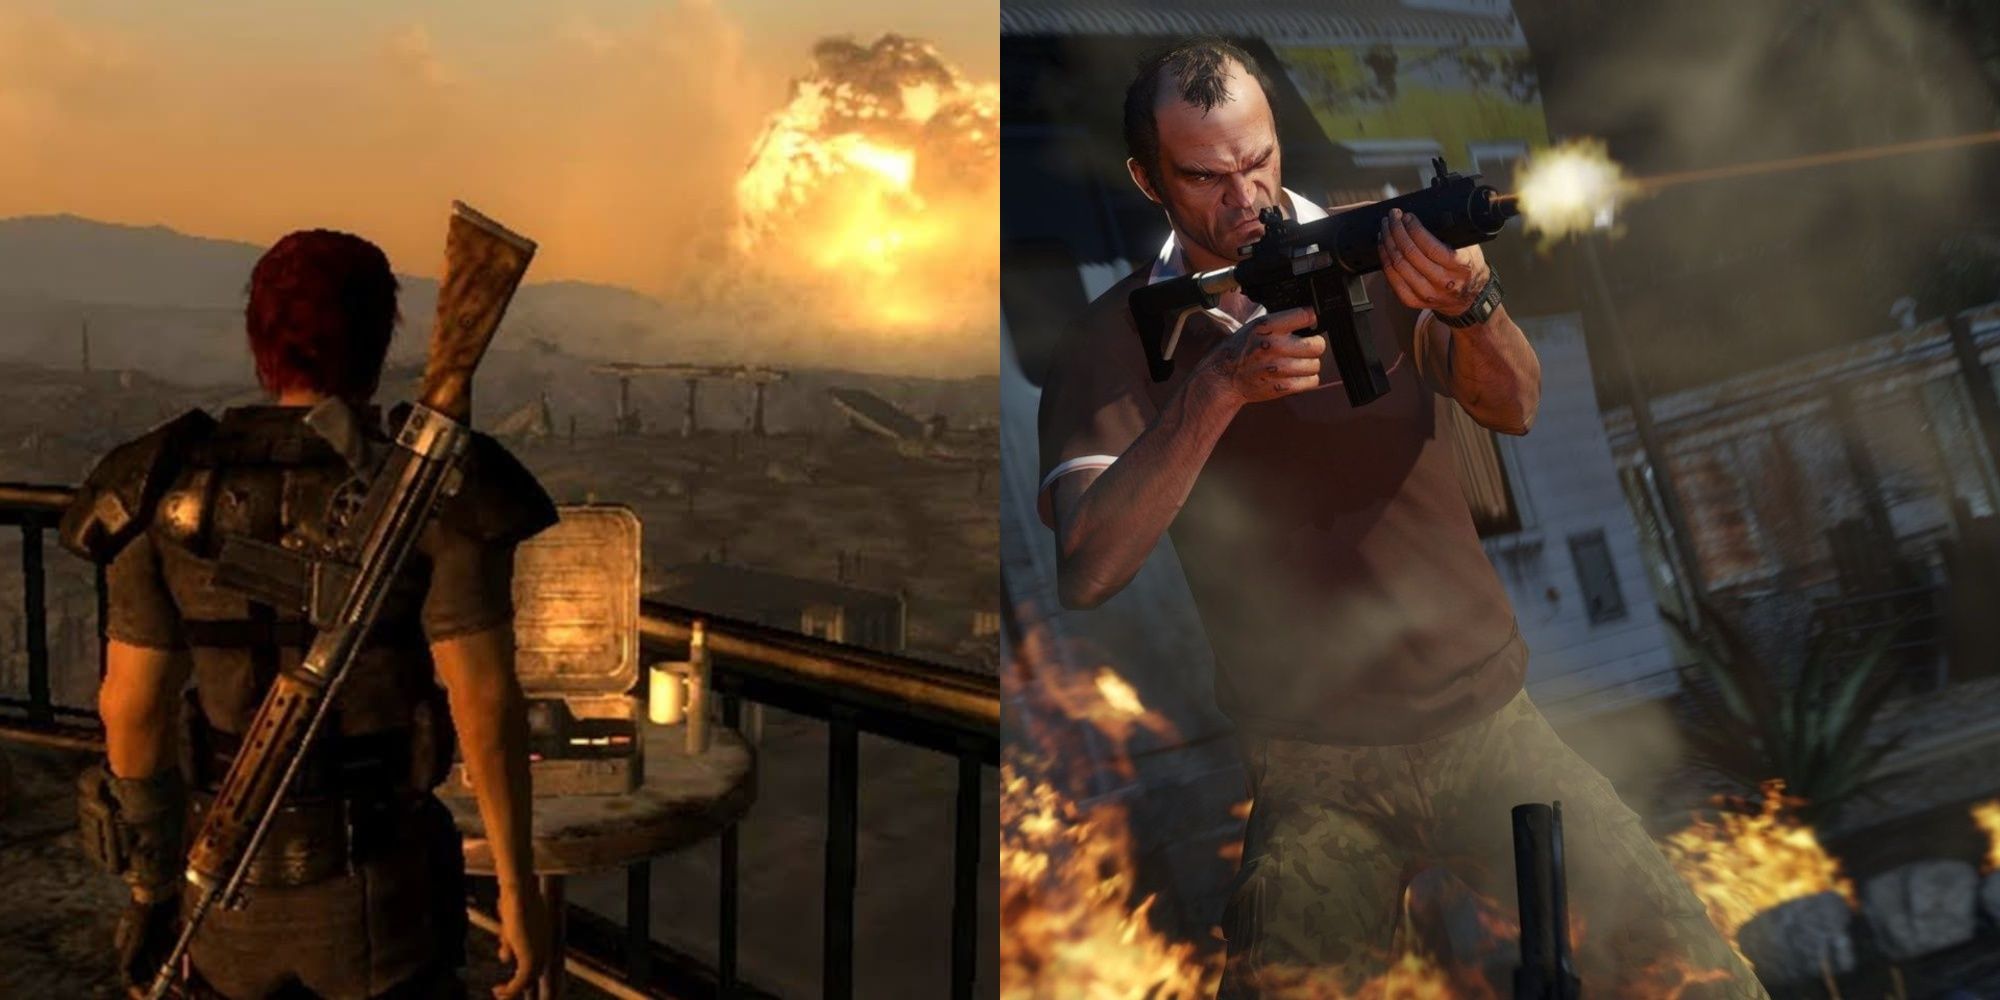 Open World Games Where You Can Be Evil Featured Split Image Fallout 3 and Grand Theft Auto 5